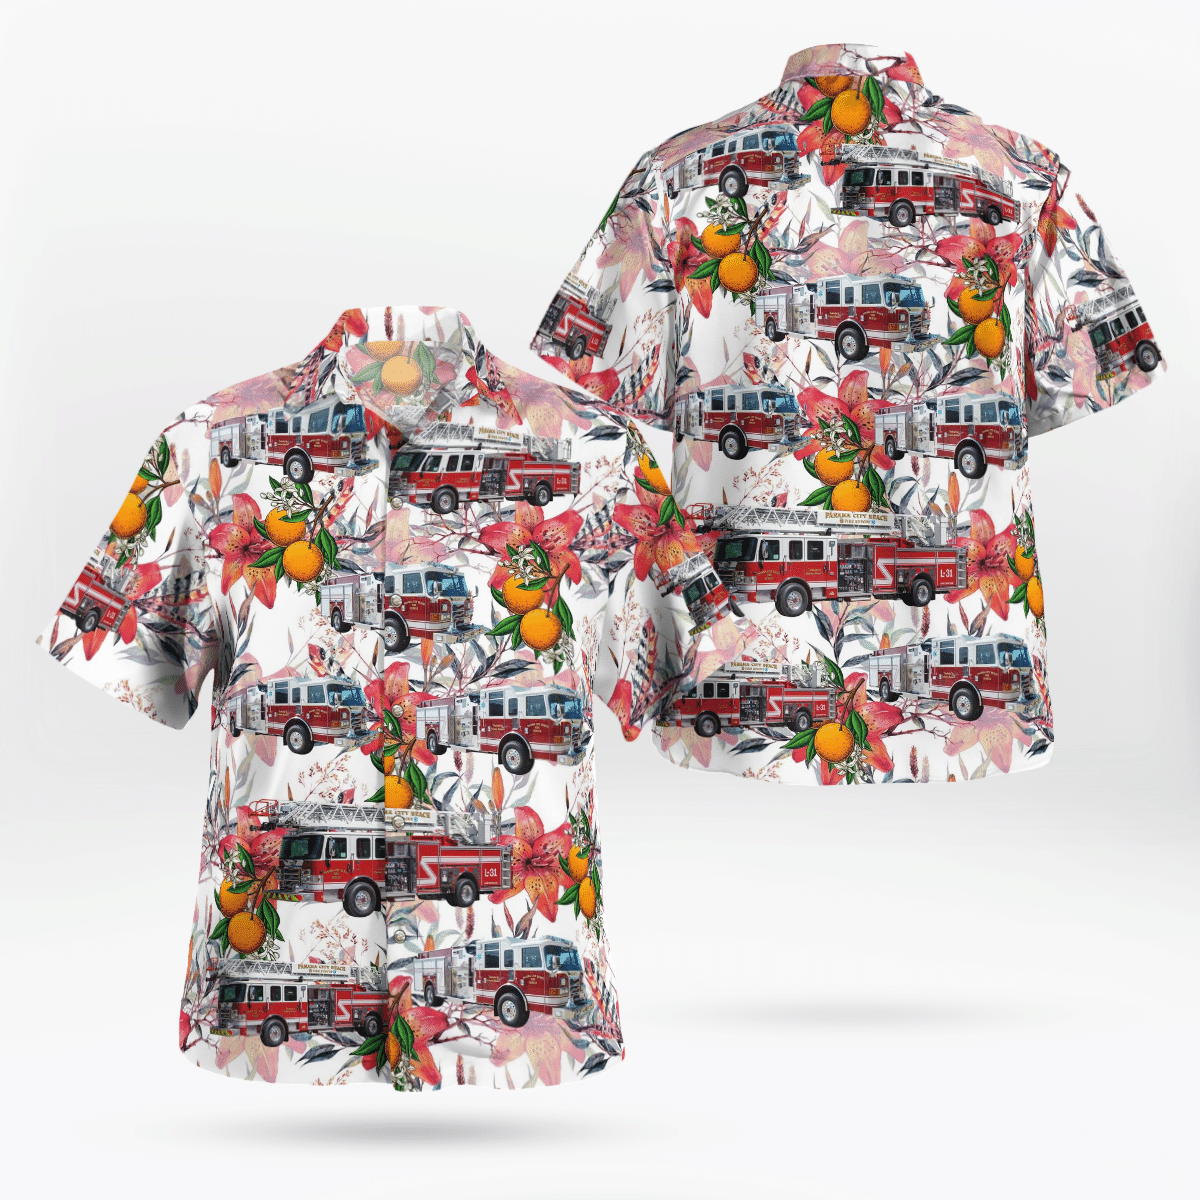 If you are in need of a new summertime look, pick up this Hawaiian shirt 86